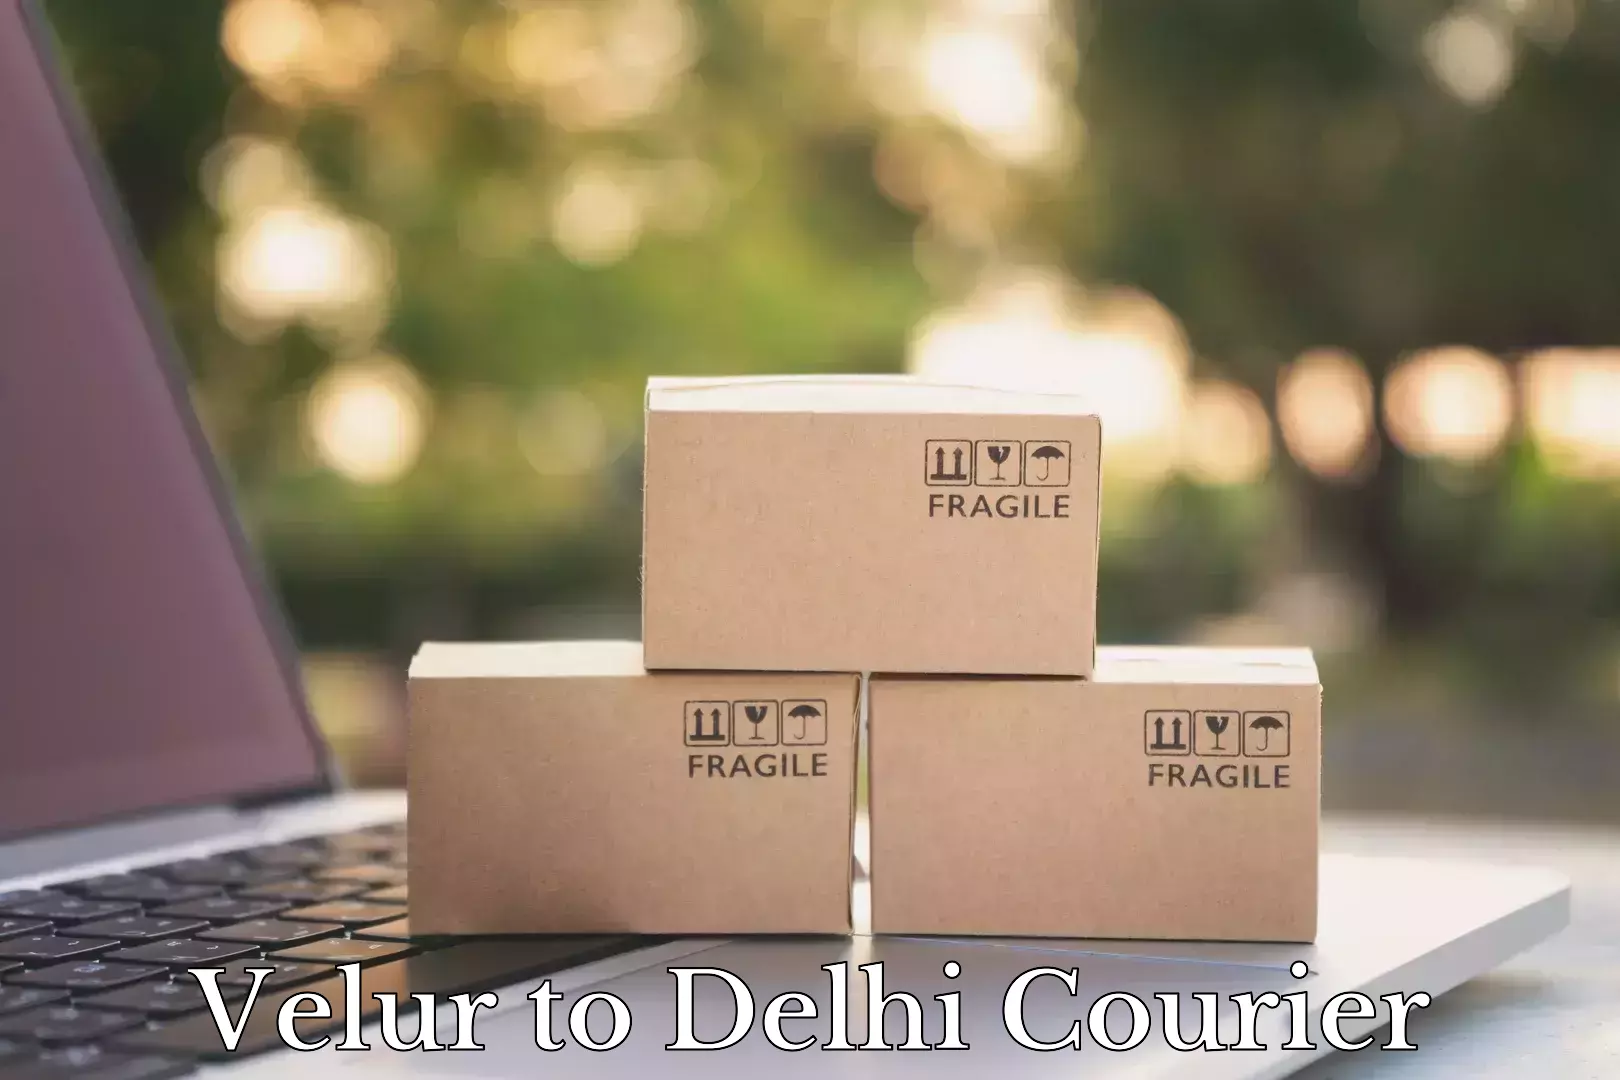 Furniture relocation experts Velur to Jhilmil